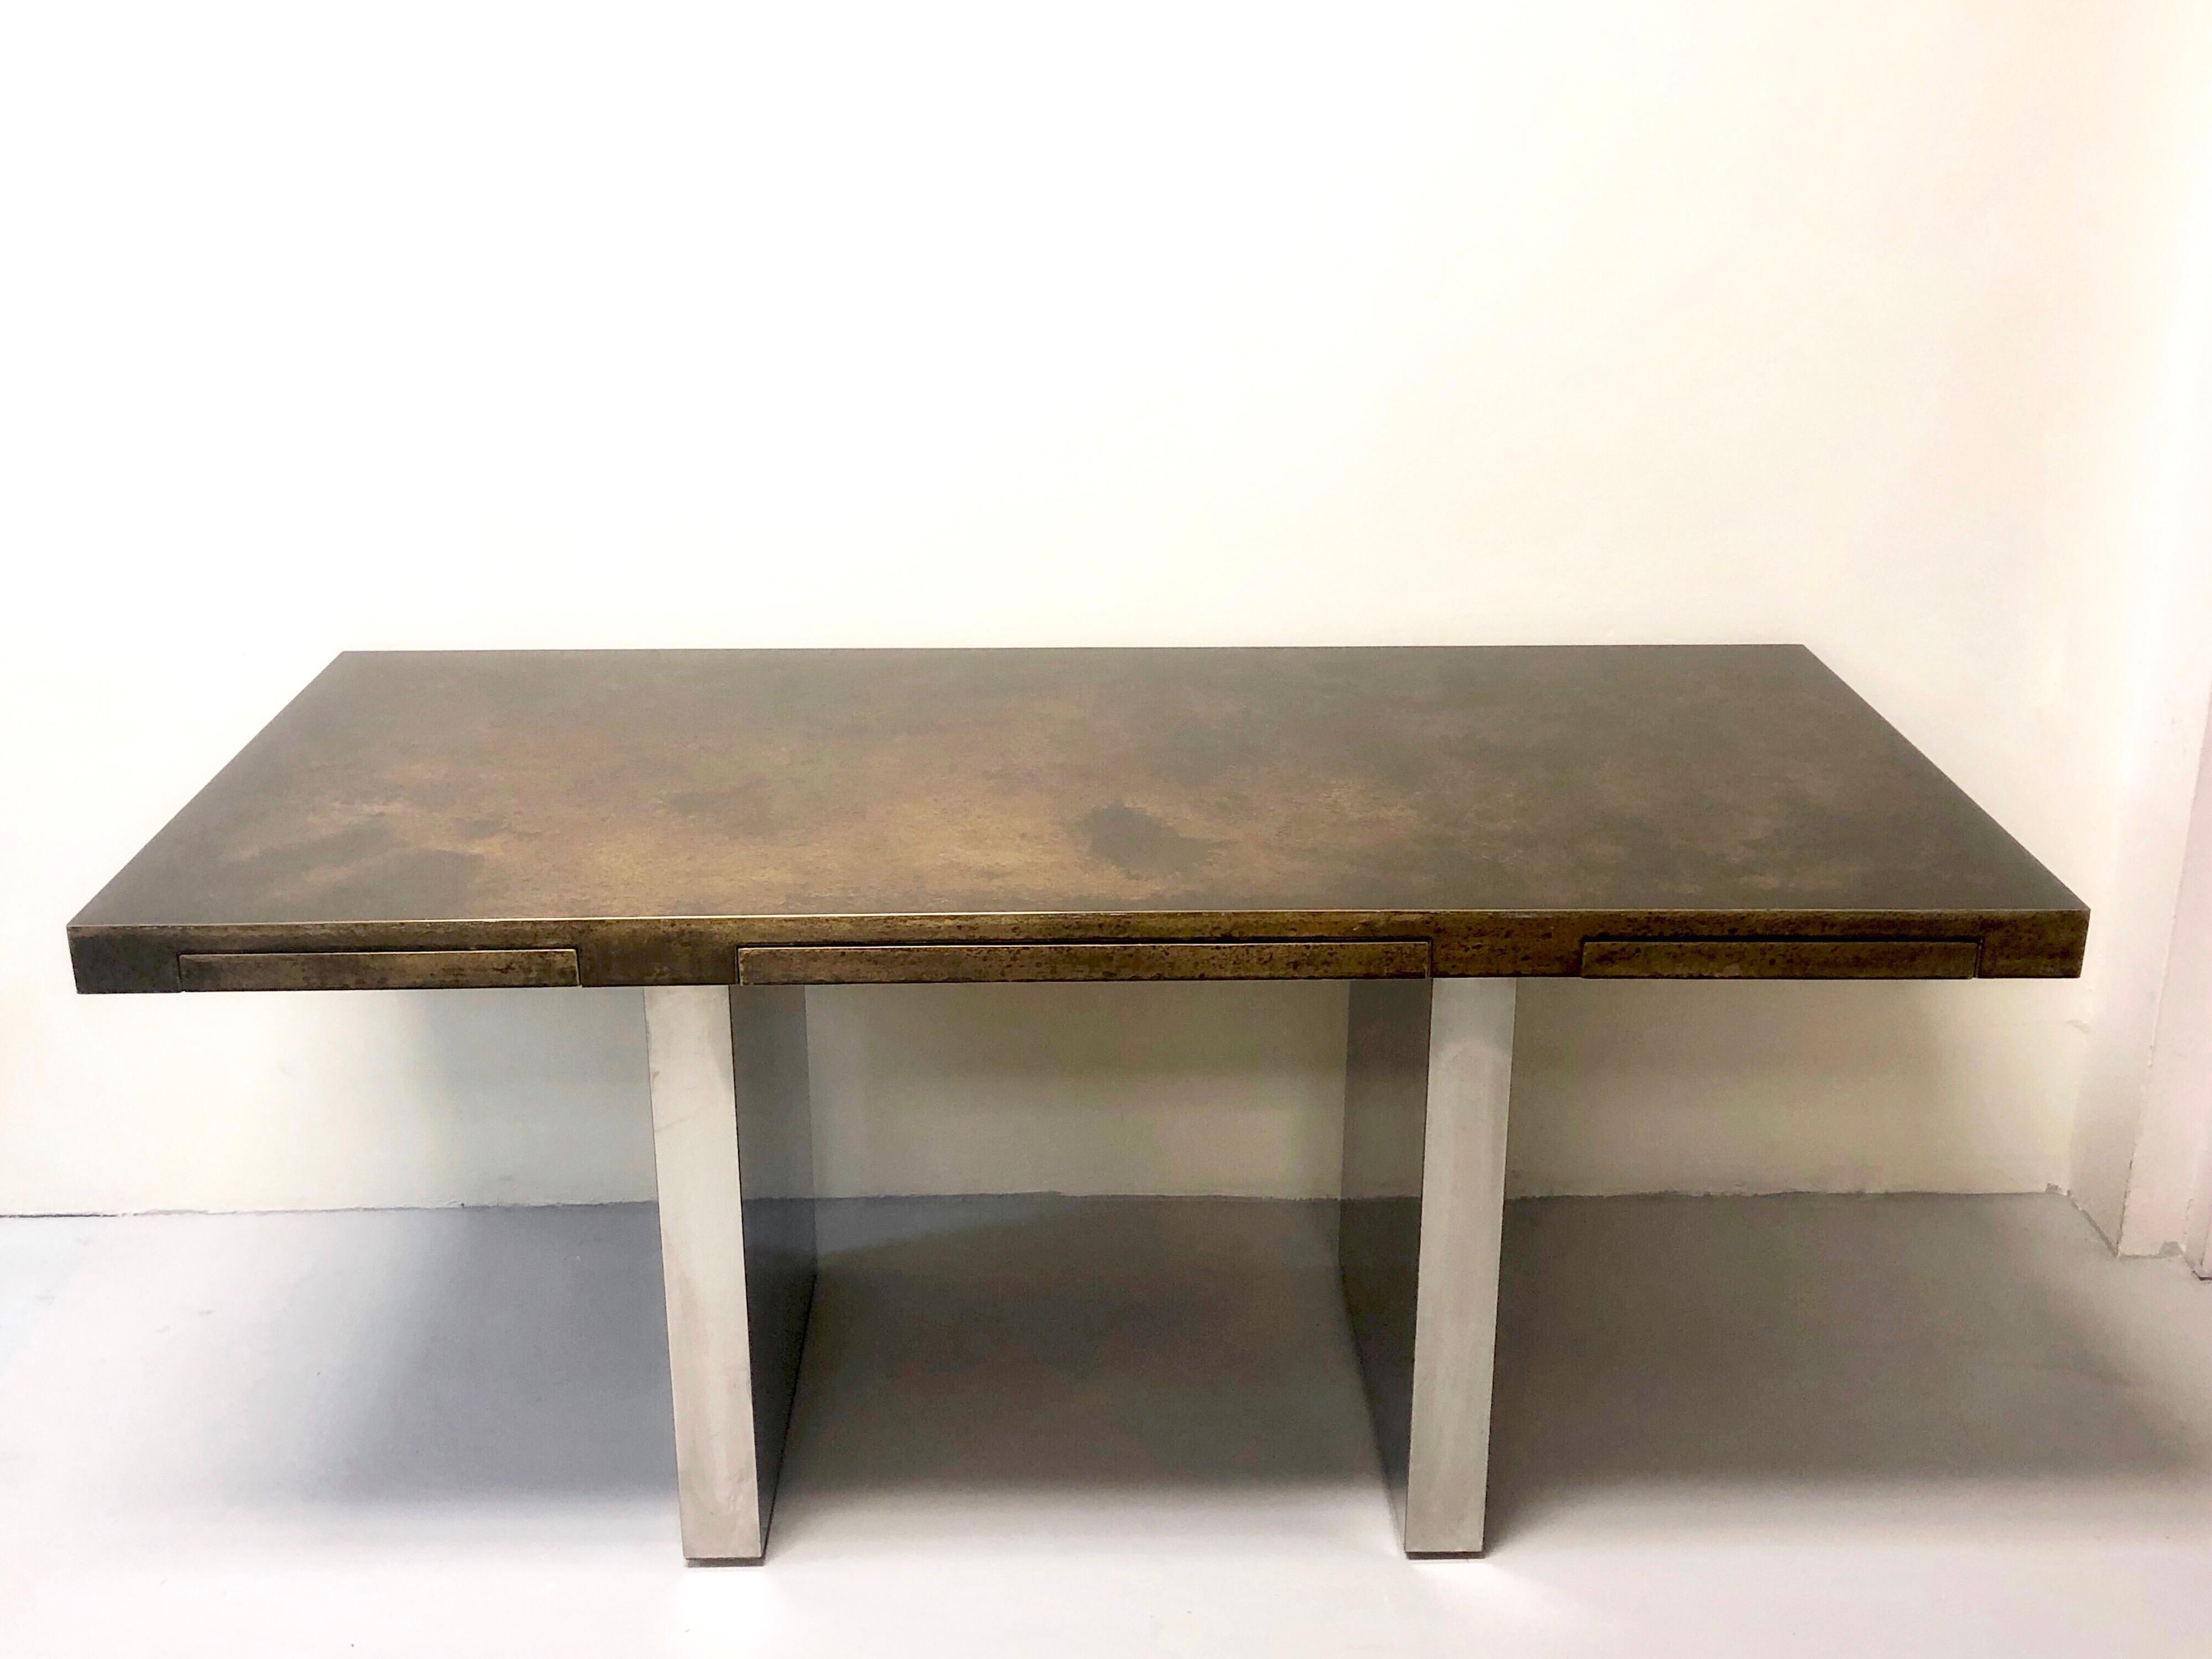 A slim Dunbar desk with very clean lines and wonderful patinated brass top. 2 monolithic bases in stainless steel. There are 3 drawers with pencil canoes very slim and deep.